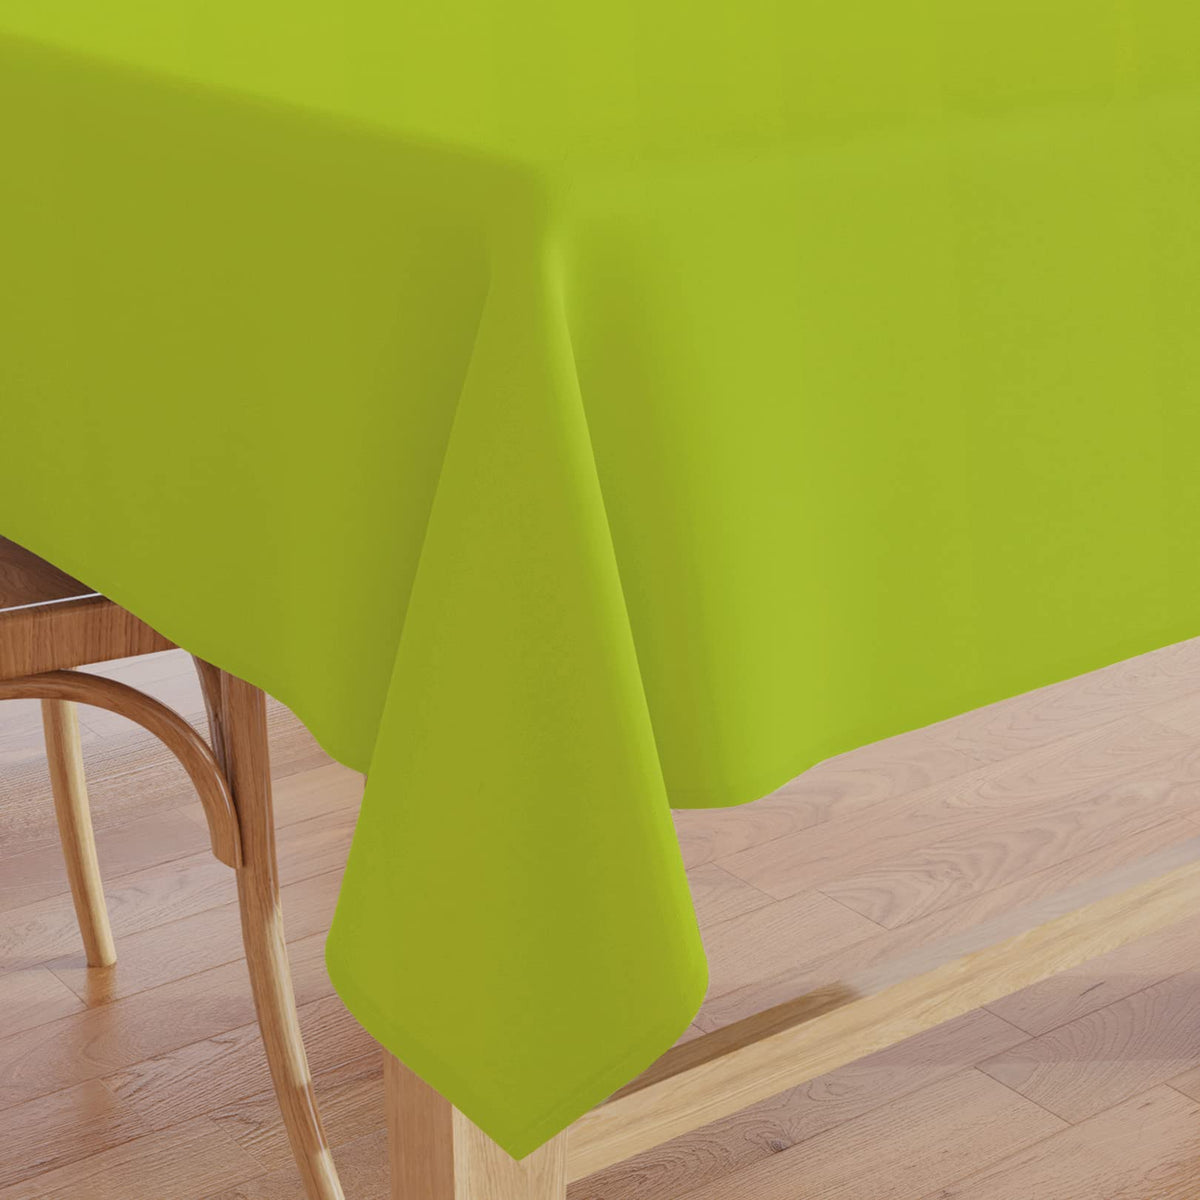 Encasa 100% Cotton Canvas Tablecloth With Lime Green Solid Color & Rectangular Size (7.5 ft Long) for 6 to 8 Seater Large Centre Dining Table Fall Decoration, Halloween & Christmas Festivals- Machine Washable